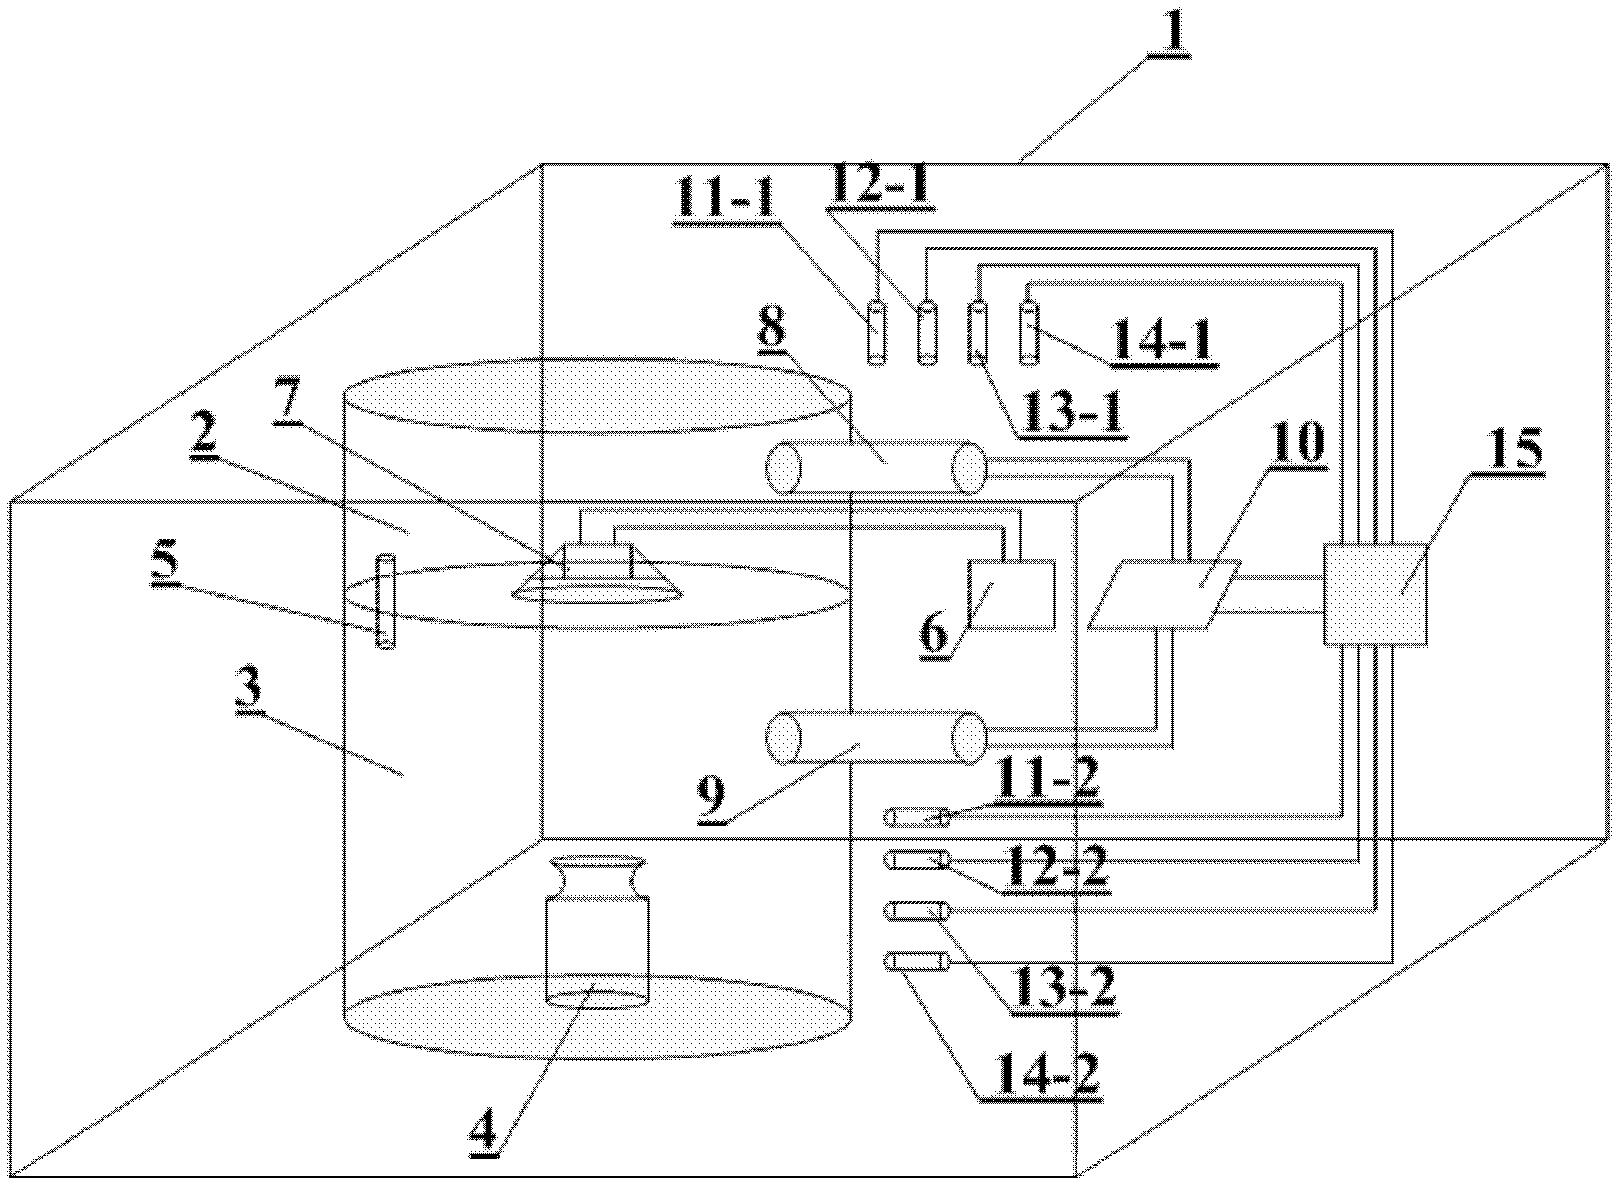 Air buoyancy correcting device used in mass measurement of counterbalance